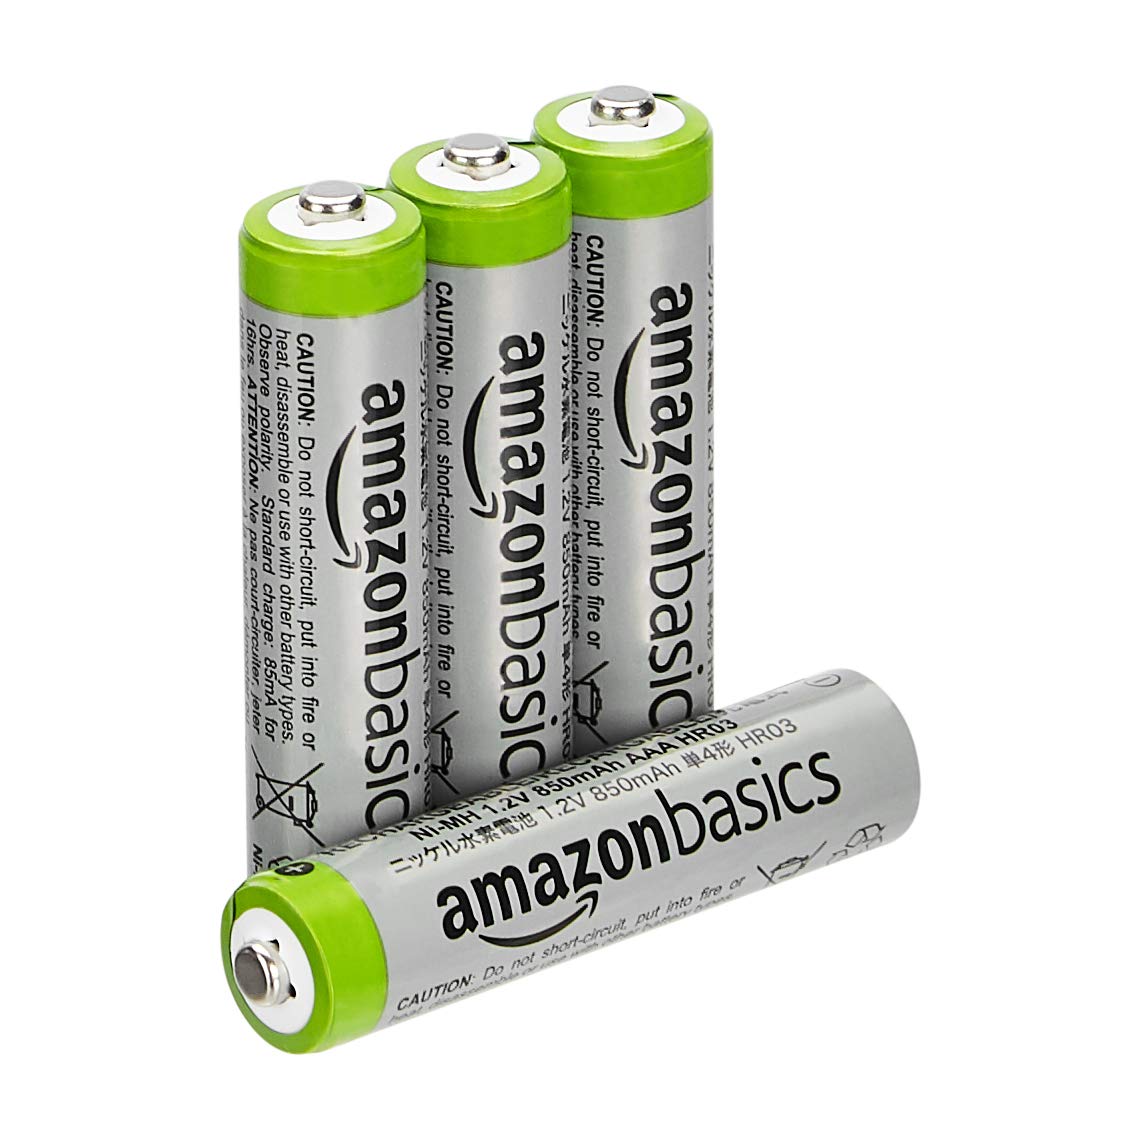 Amazon Basics 4-Pack Rechargeable AAA NiMH High-Capacity Batteries, 850 mAh, Pre-Charged $4.96